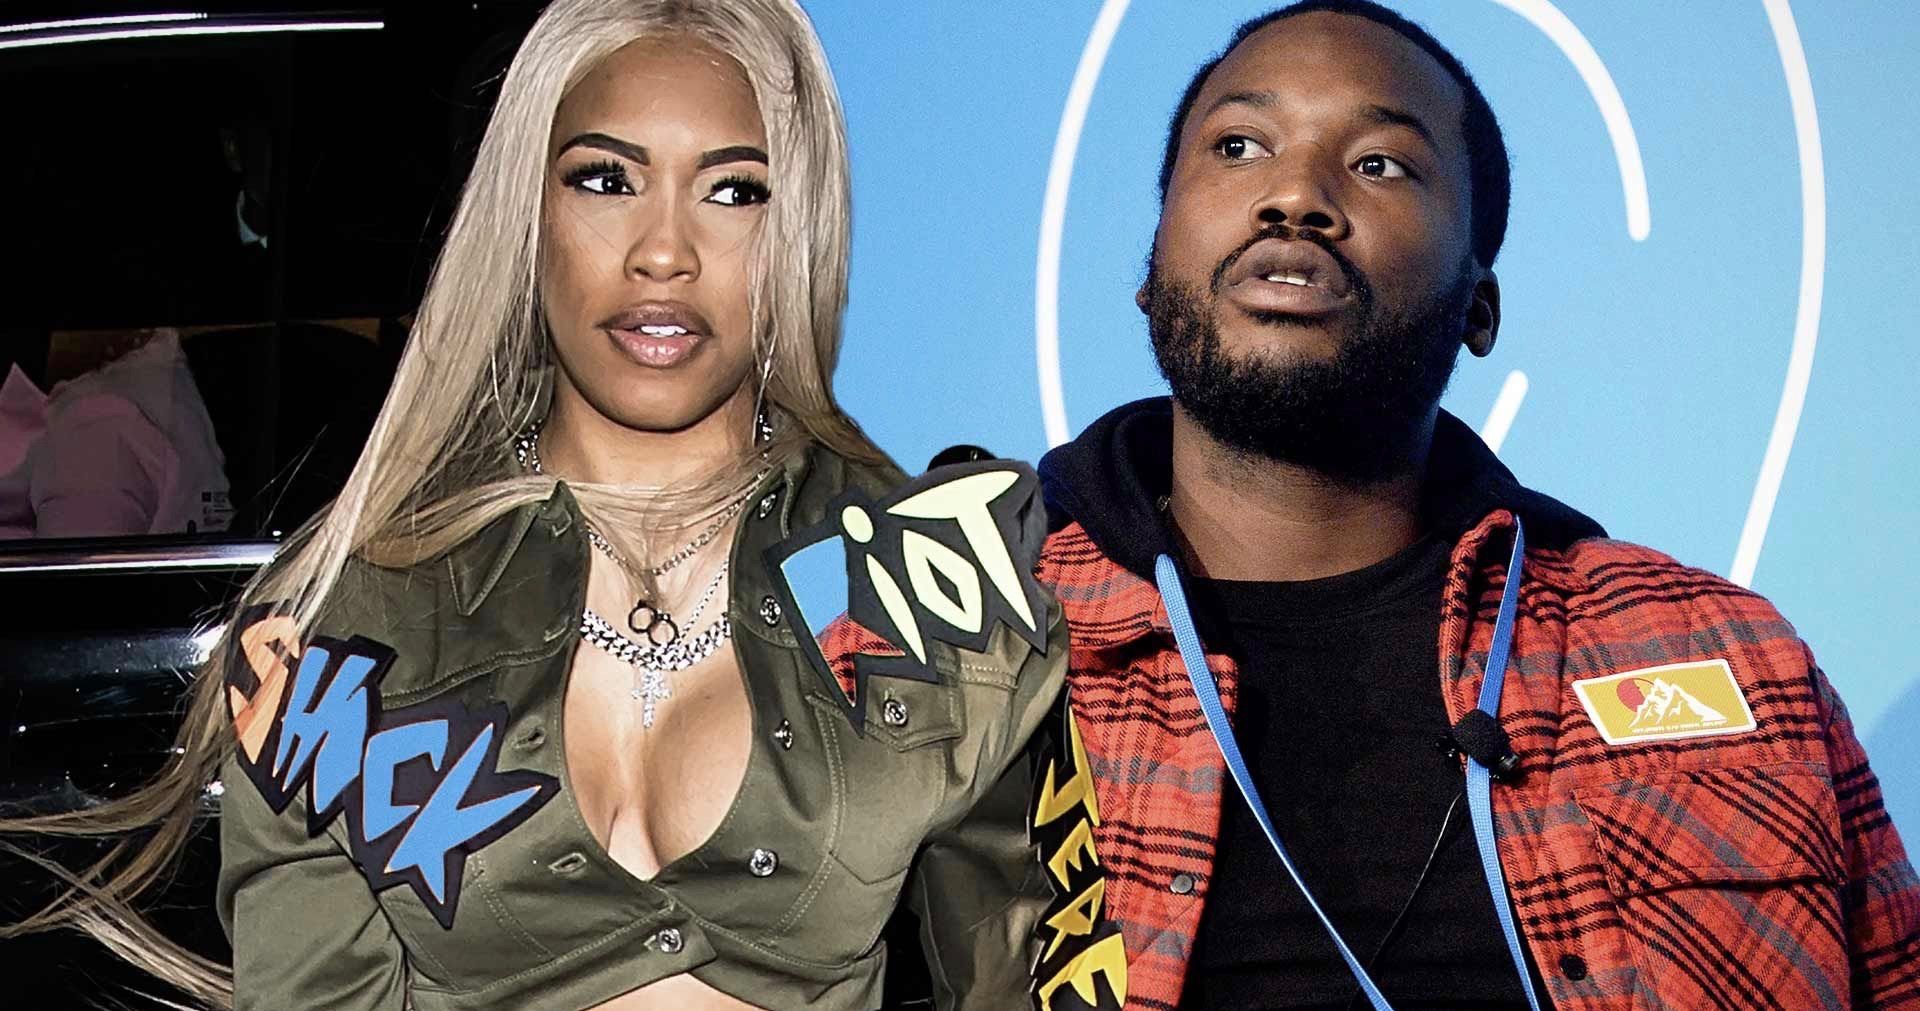 Meek Mill Poses With Girlfriend Days After Announcing Her Pregnancy